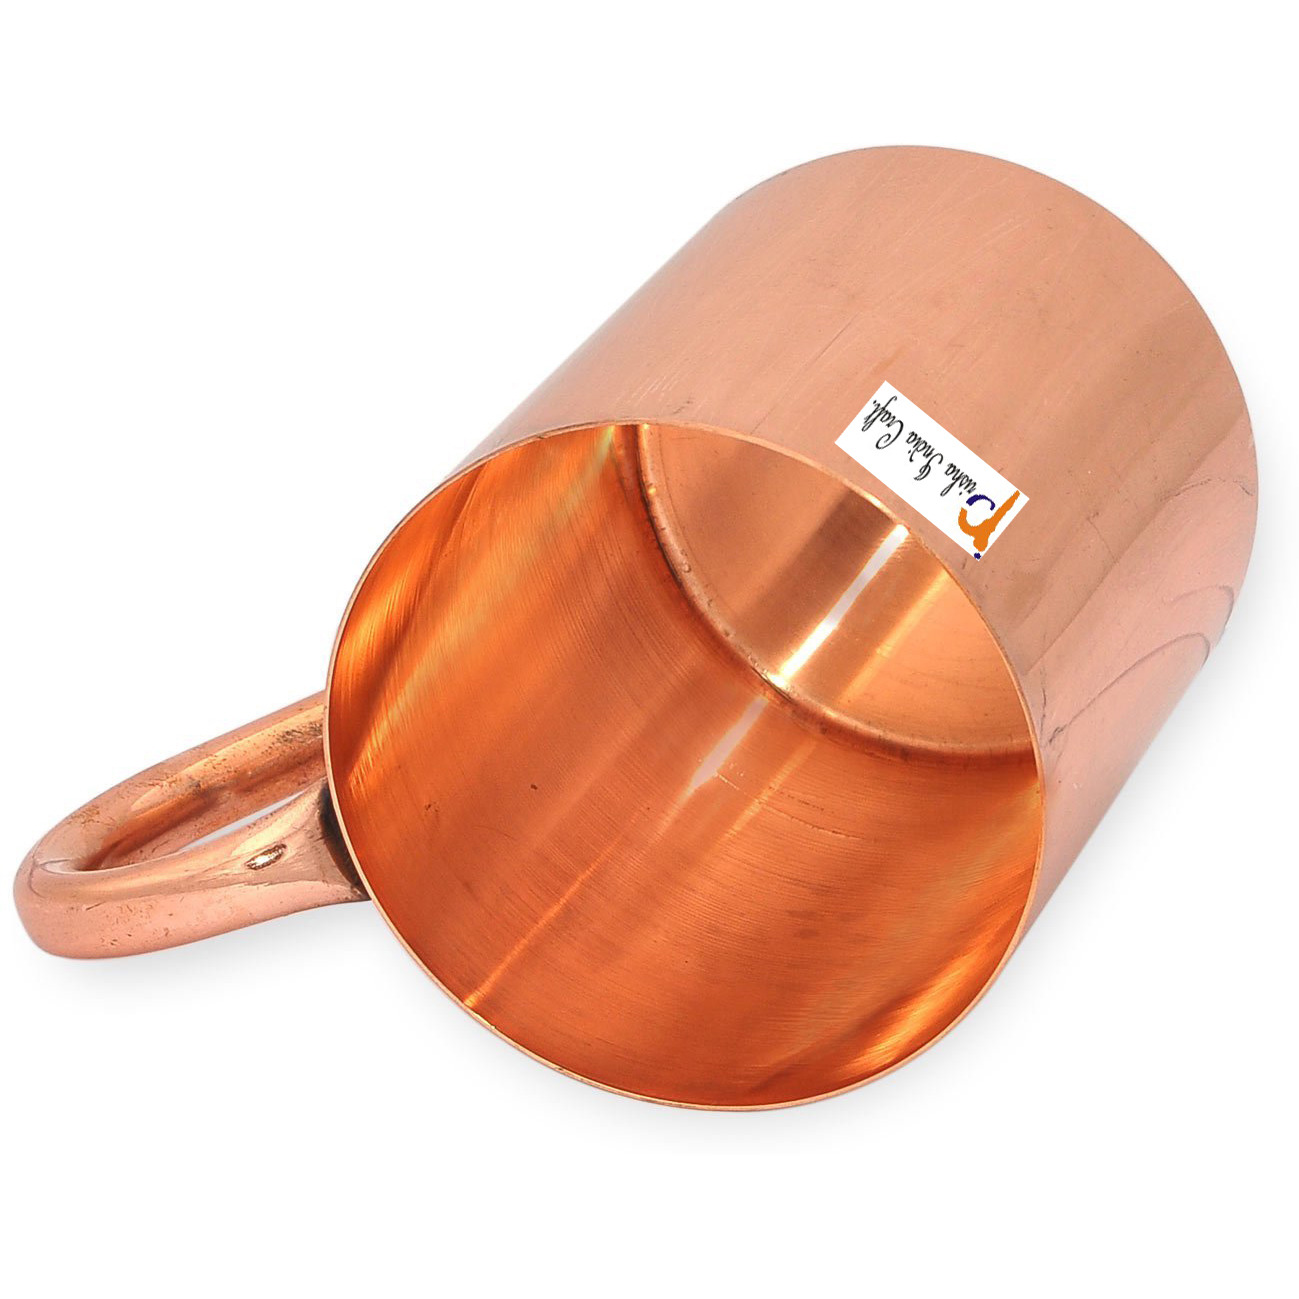 Set of 6 - Prisha India Craft B. Copper Mug for Moscow Mules 450 Ml / 15 Oz - 100% Pure Copper - Lacquered Finish - Solid Copper Best Quality Moscow Mule Mug, Cocktail Cup, Copper Mugs, Cocktail Mugs